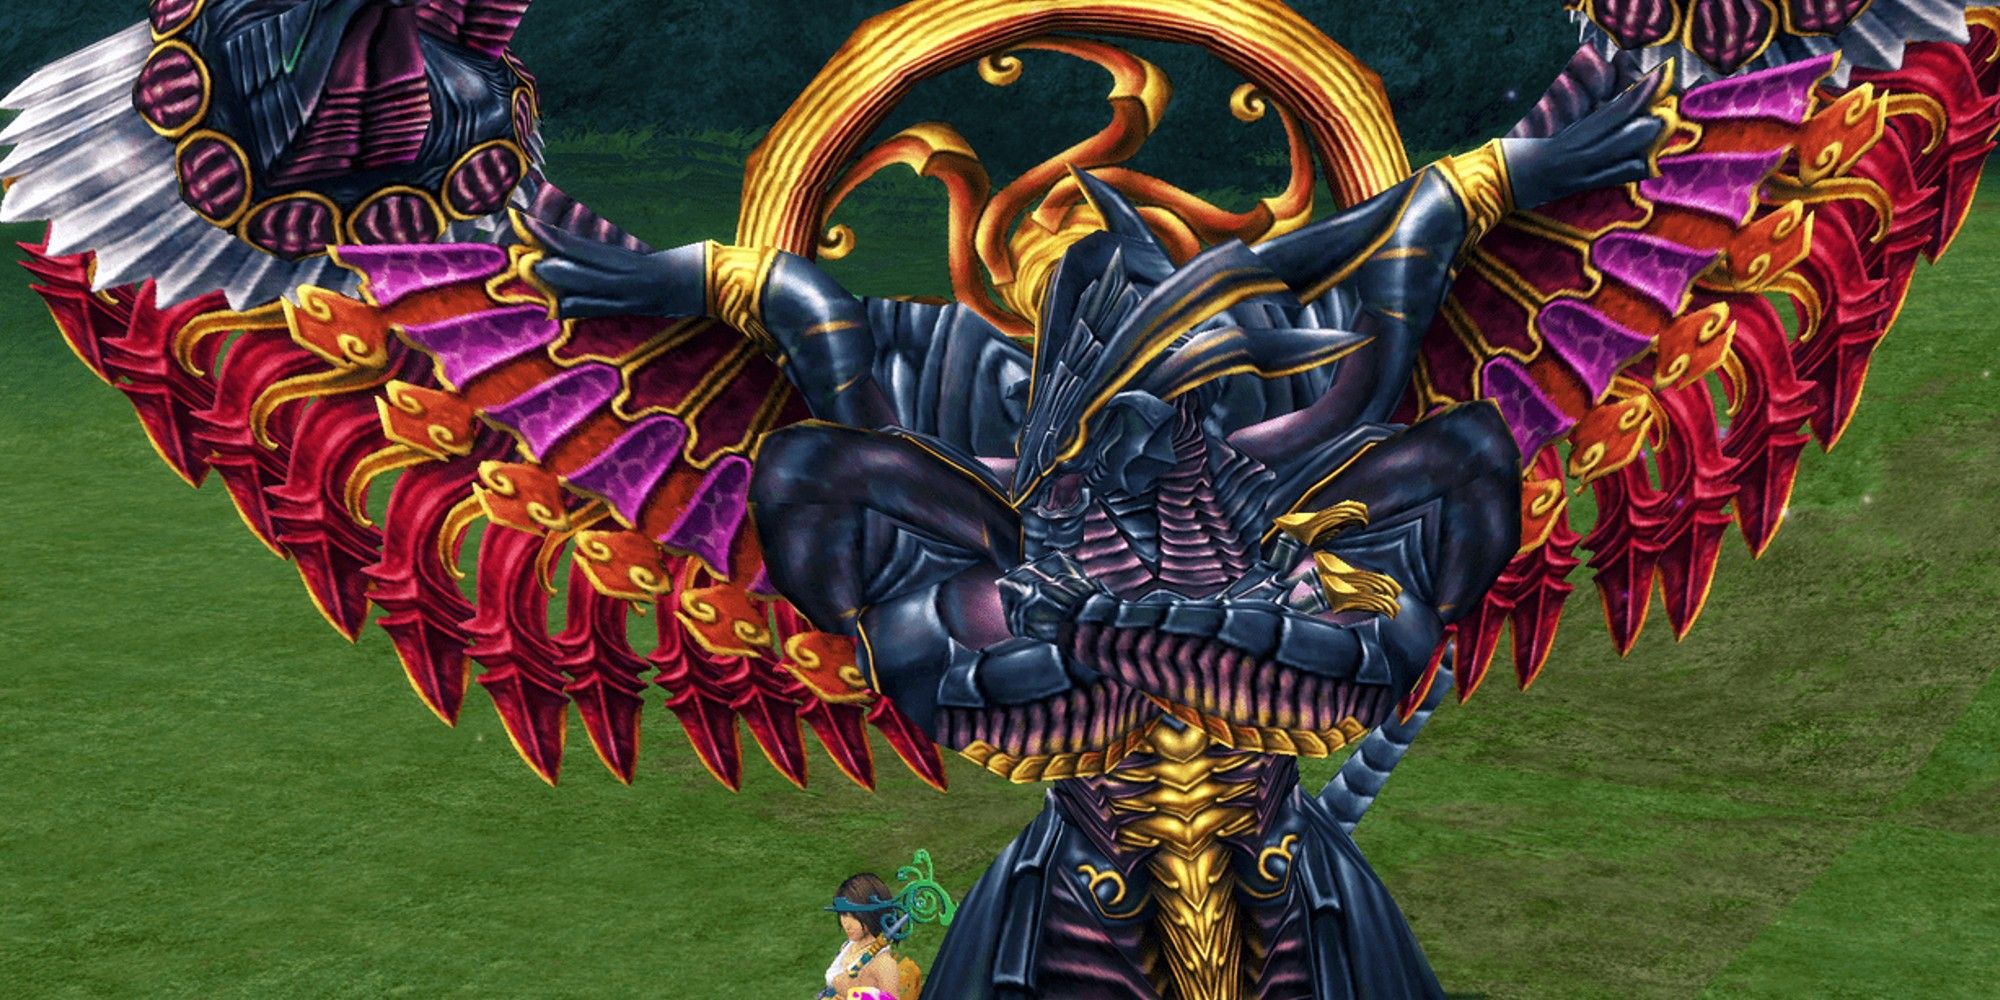 Bahamut FF10 standing in a power pose